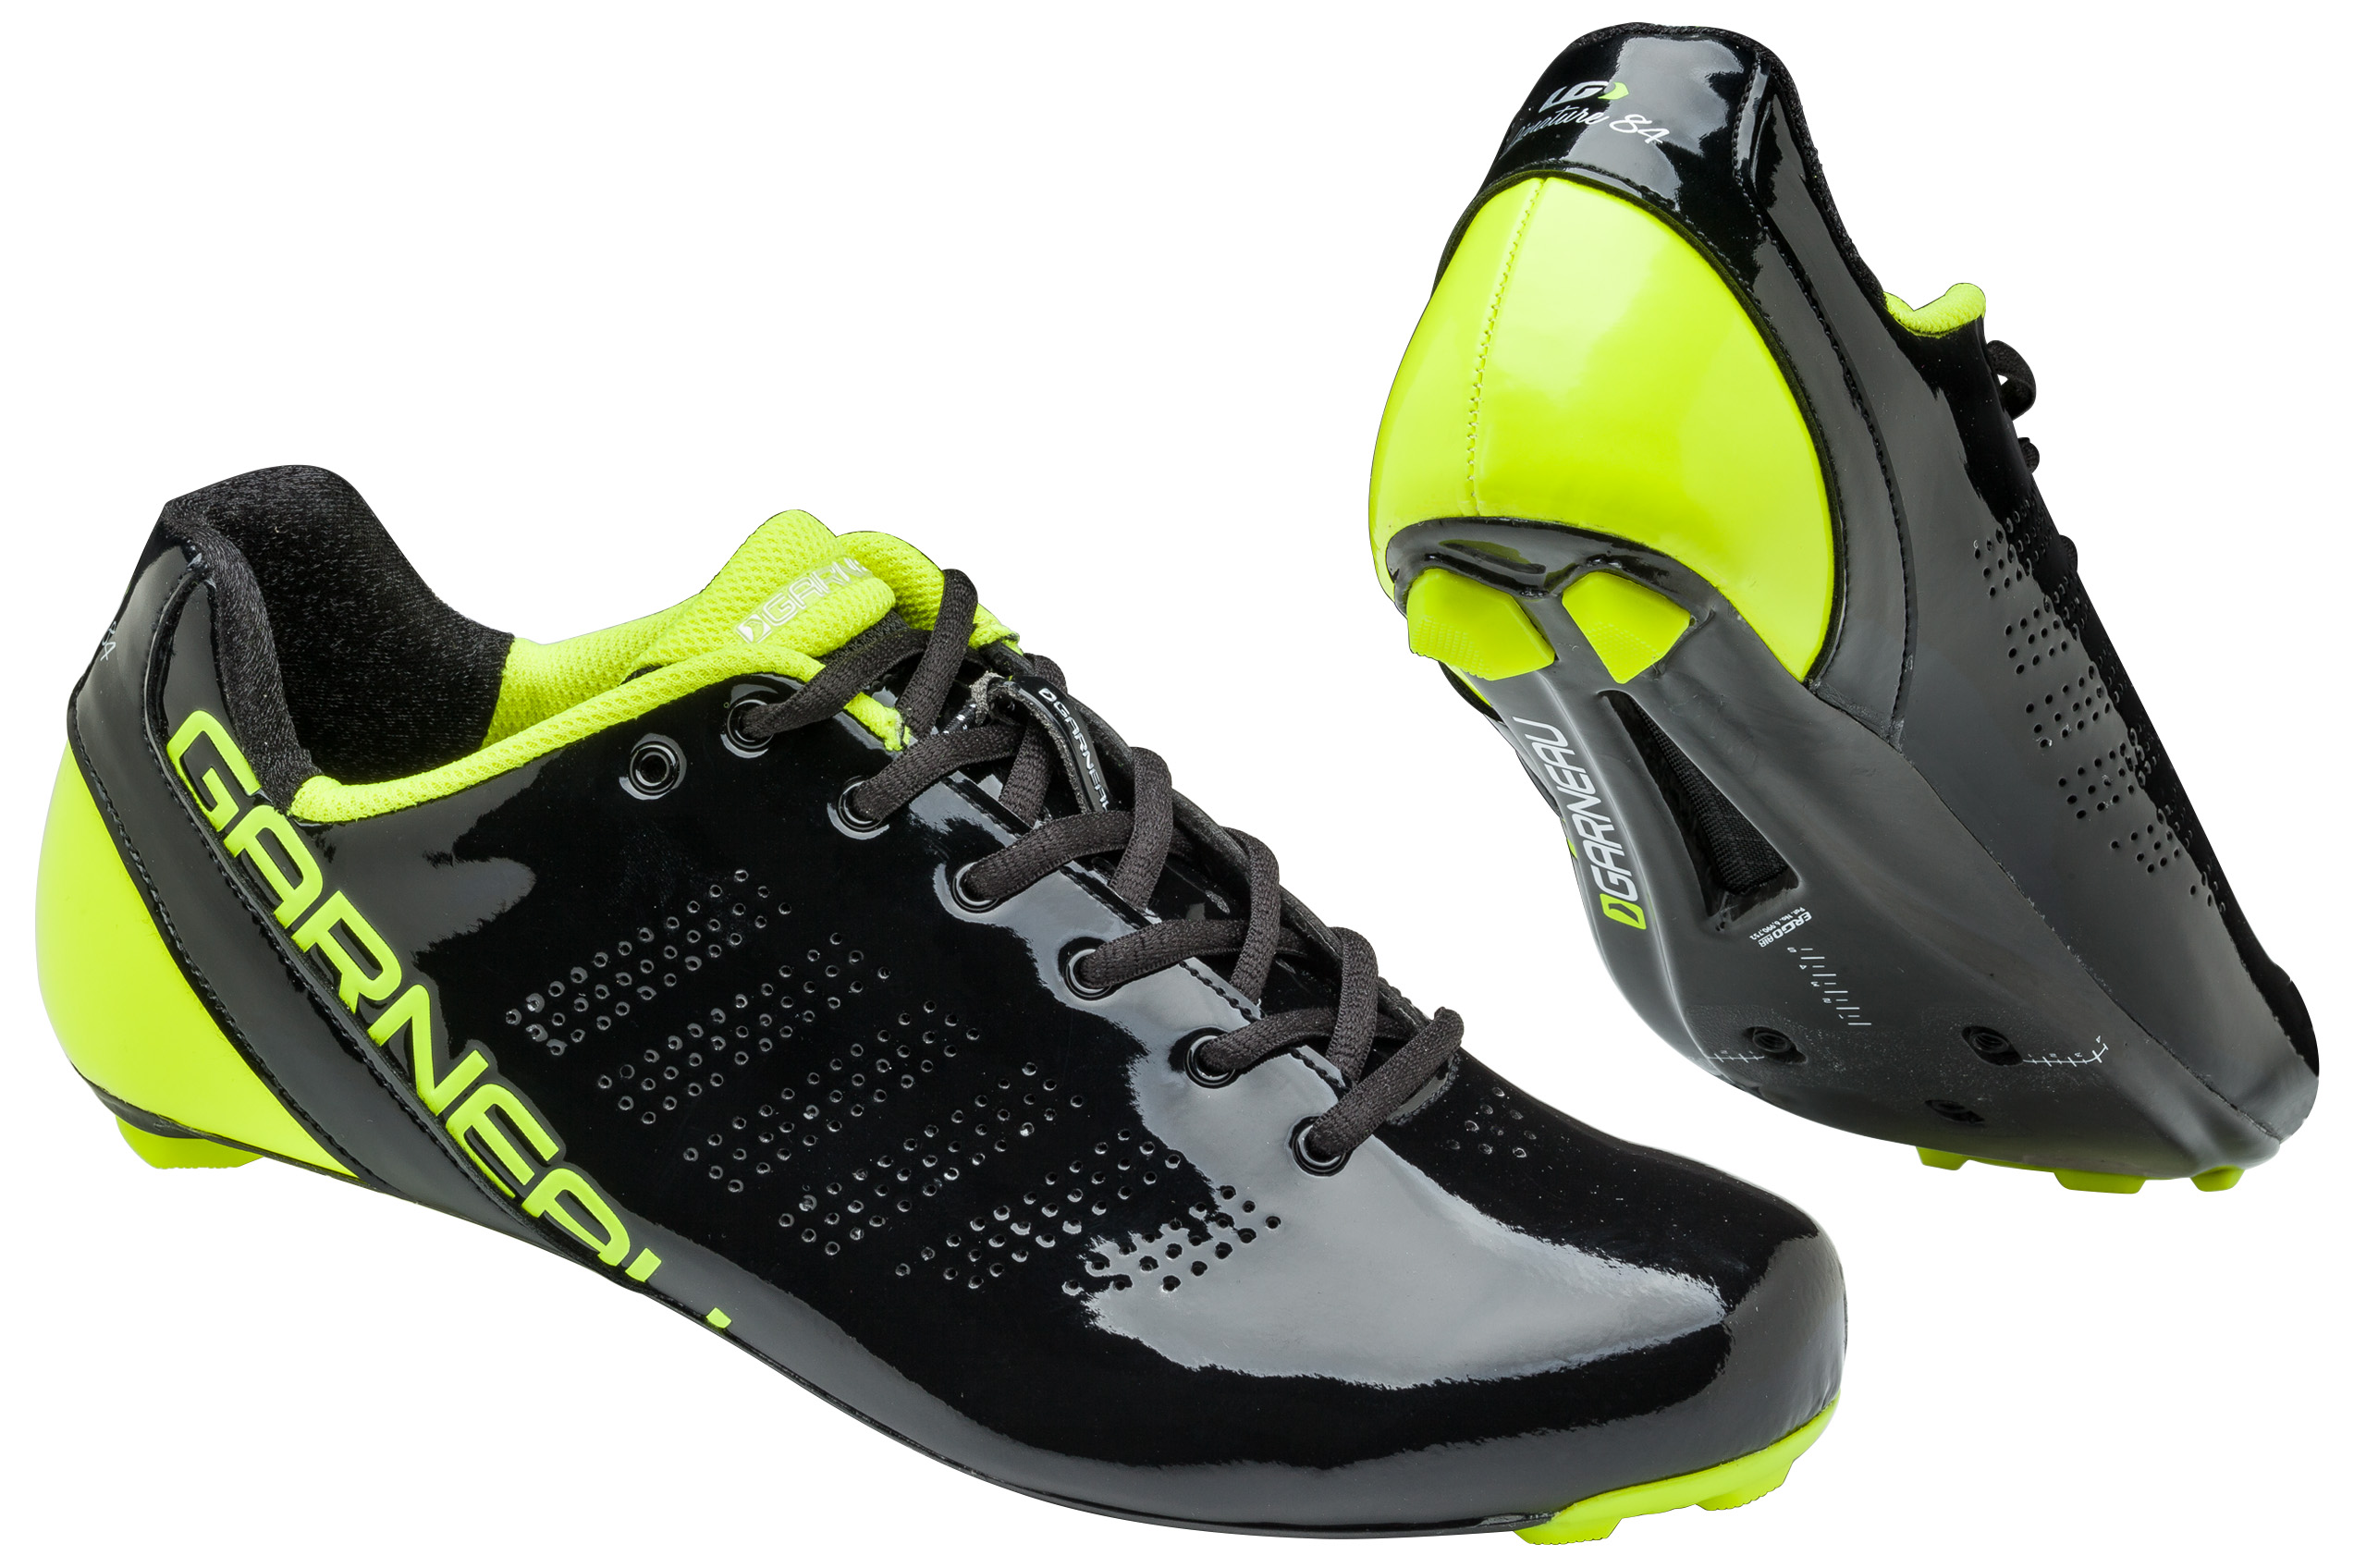 Louis Garneau Signature 84 shoes combine modern tech with classc look | Bicycle Retailer and ...